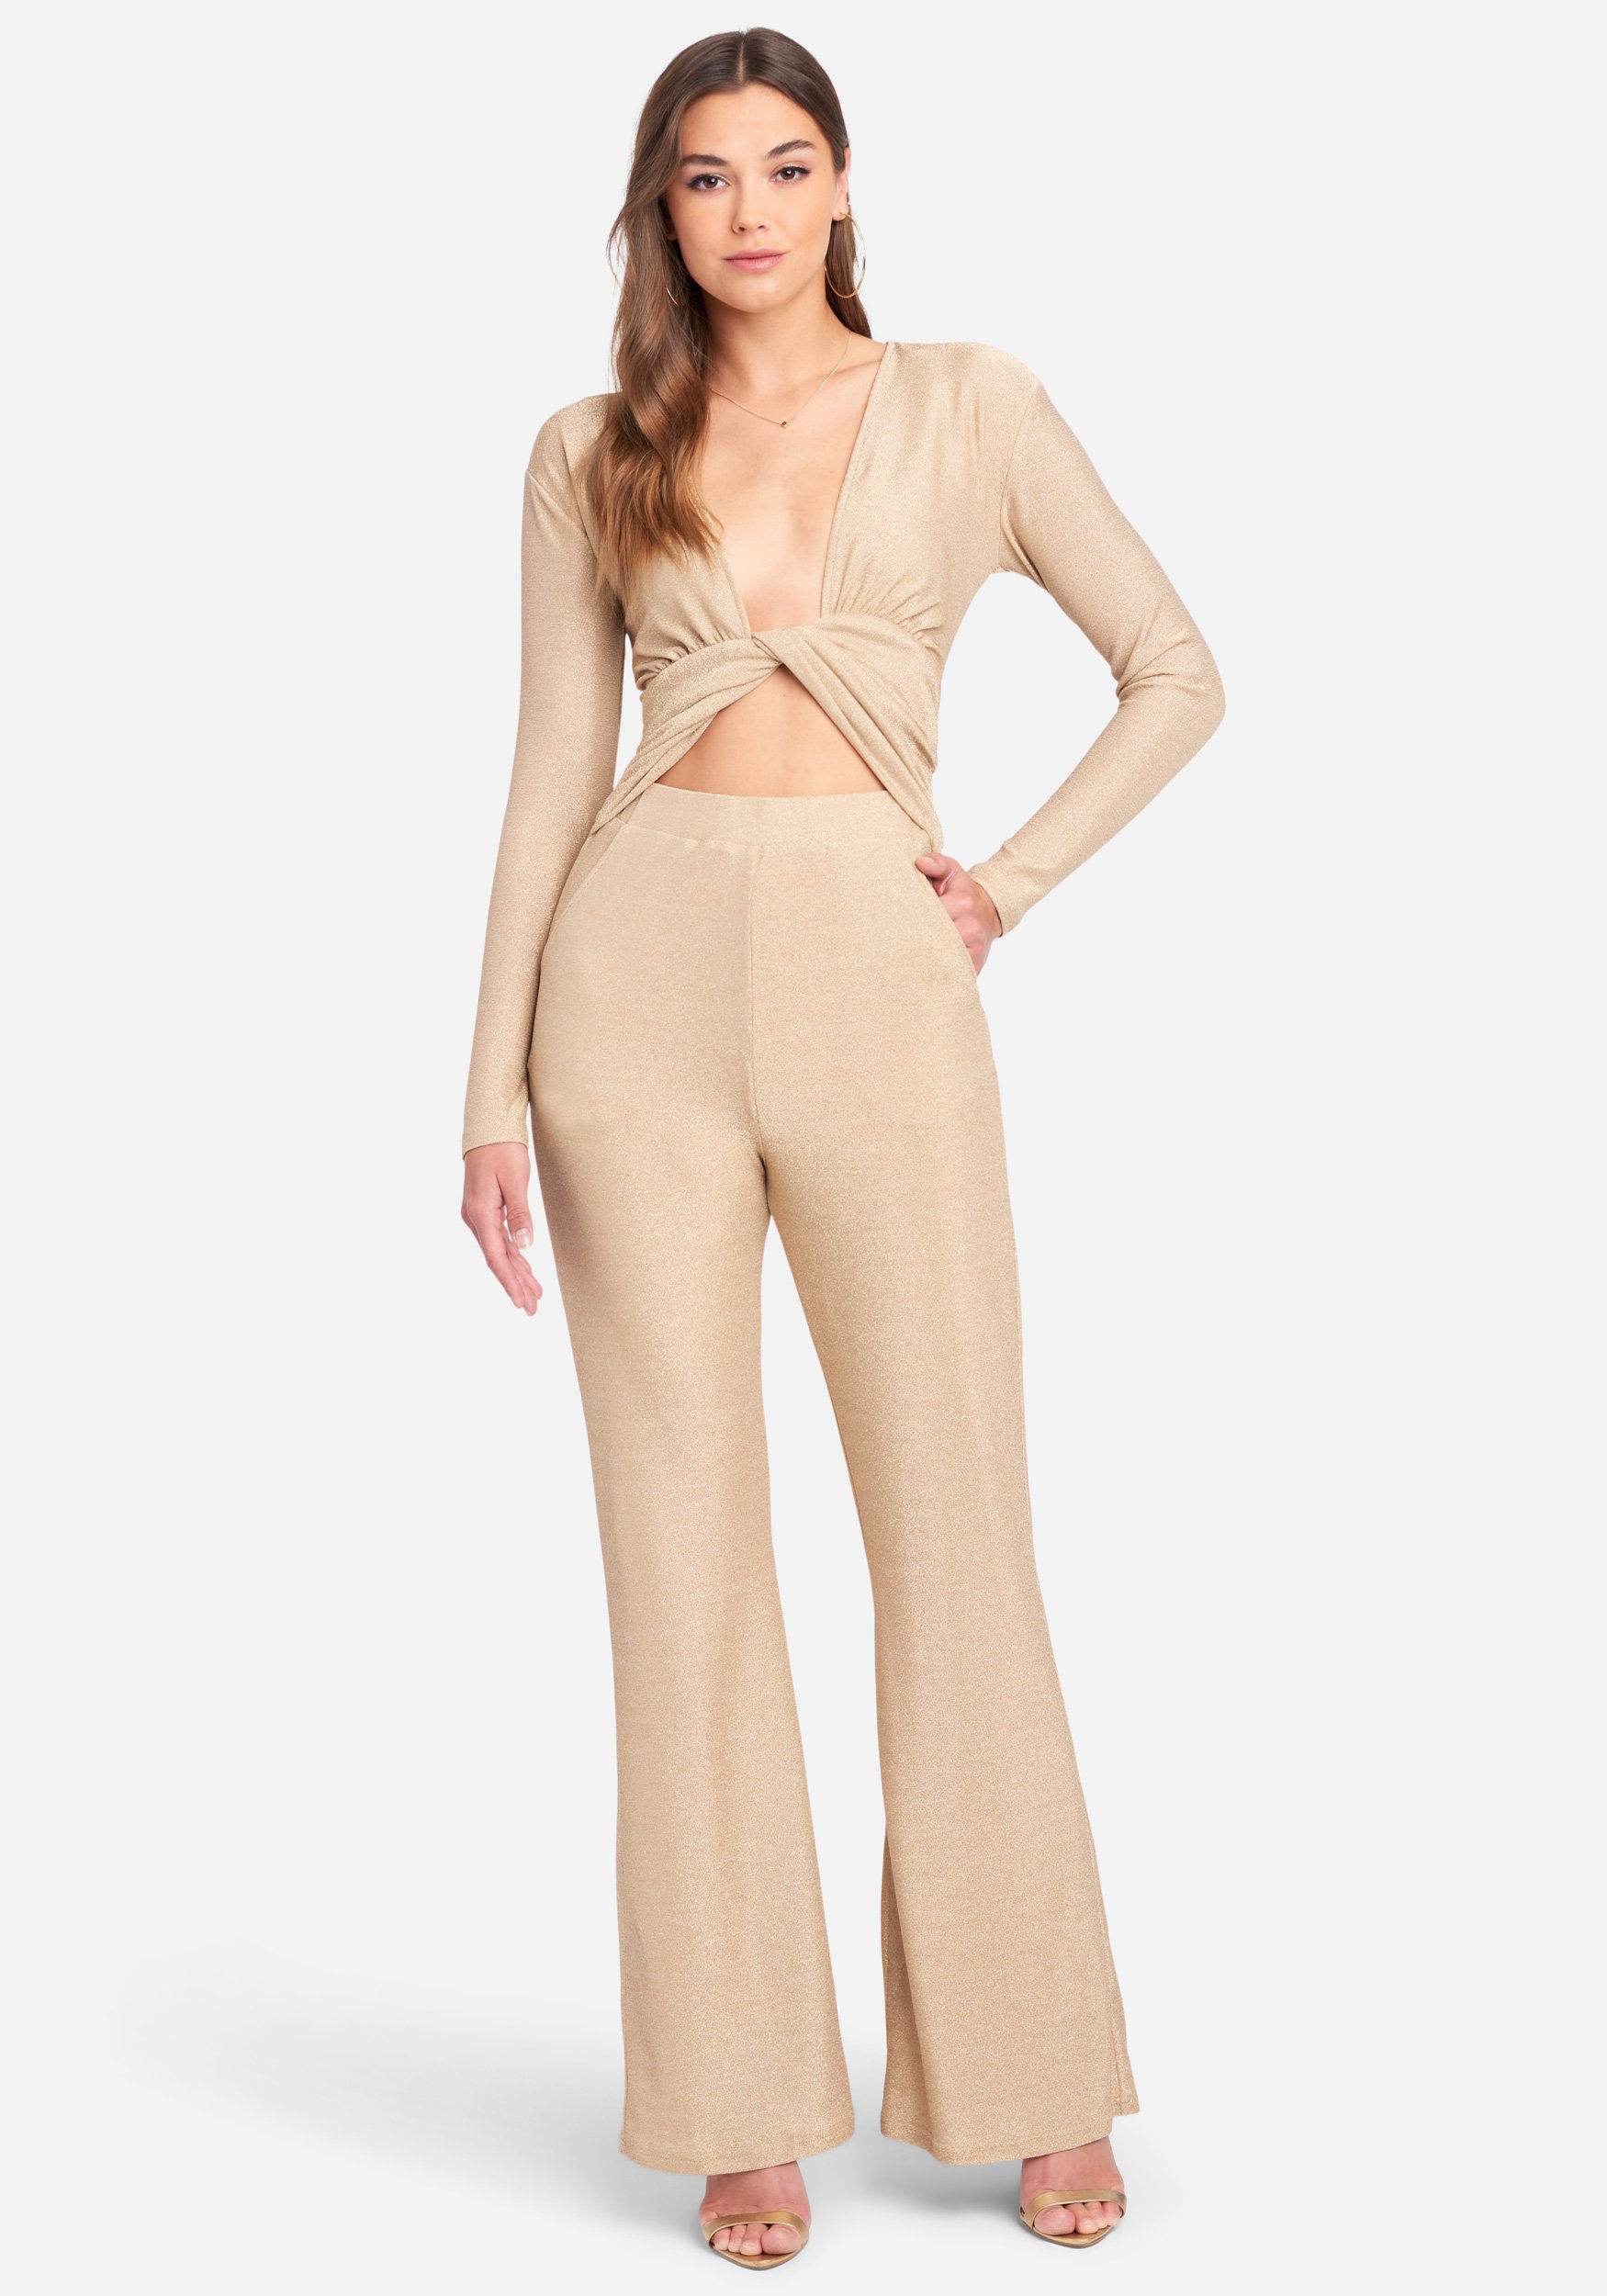 Bebe Women's Sparkle Knot Front Jumpsuit, Size XS in Gold Metal